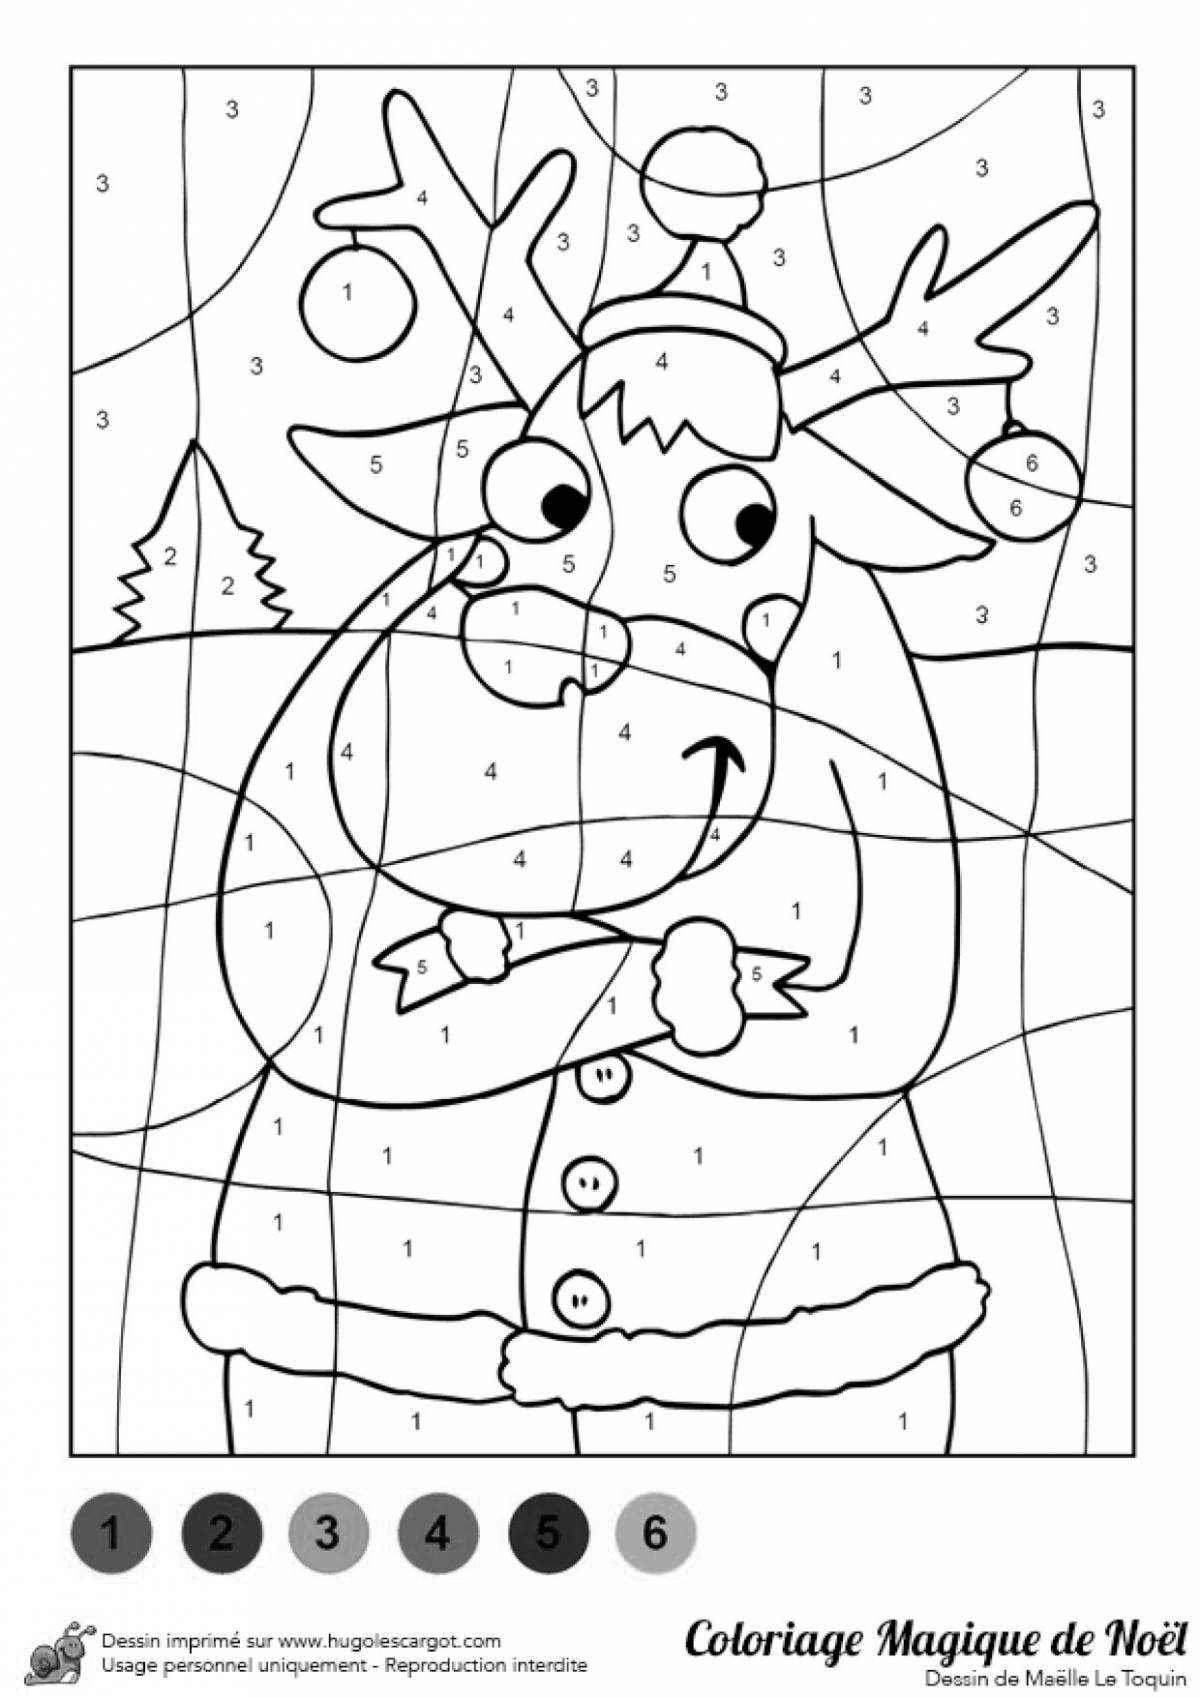 Shining Christmas by number coloring book for kids